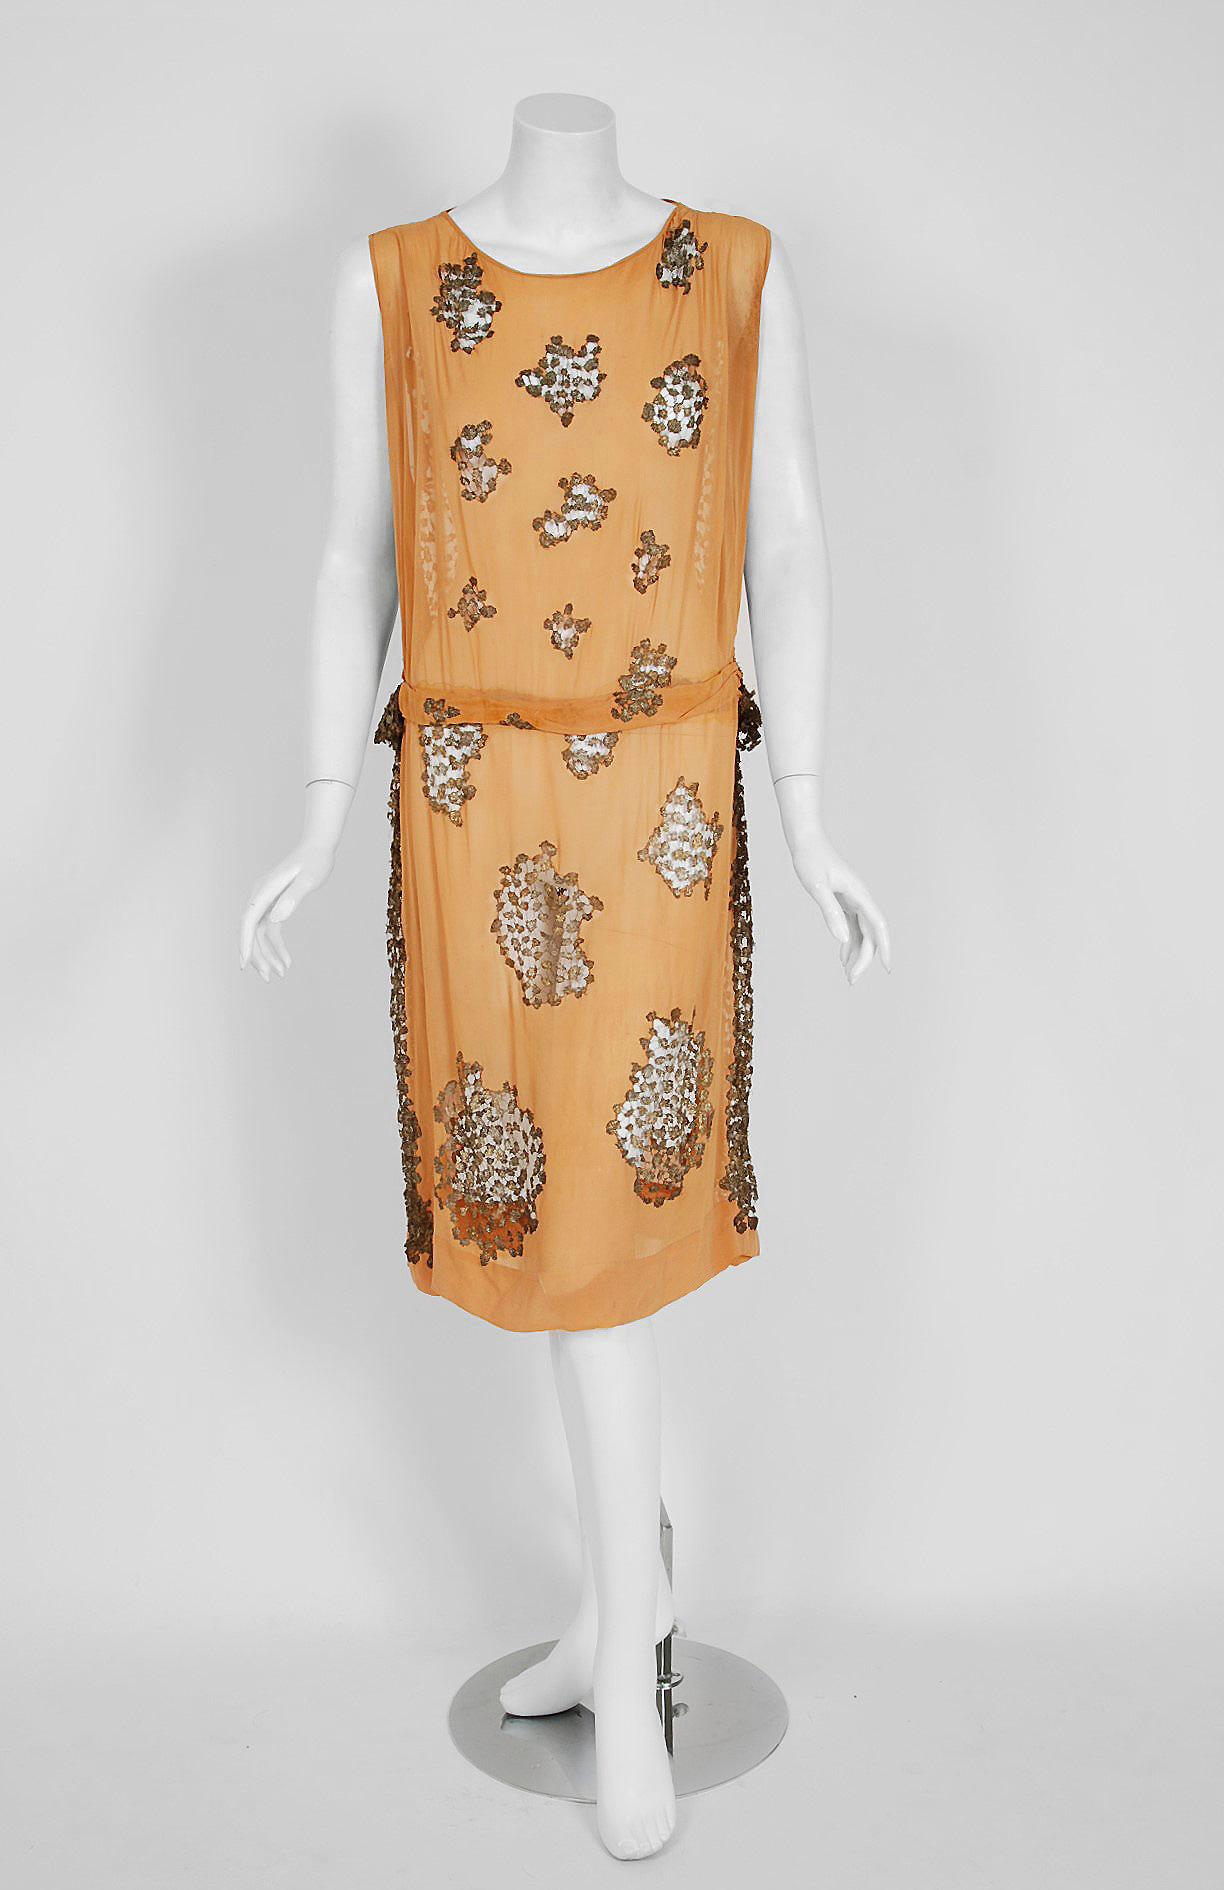 Goupy Paris was one of the elite couture houses operating during the magical Art-Deco era. This breathtaking garment, all hand-stitched, is fashioned in vibrant tangerine silk-chiffon and metallic-gold lace. The garment's avant-garde unstructured